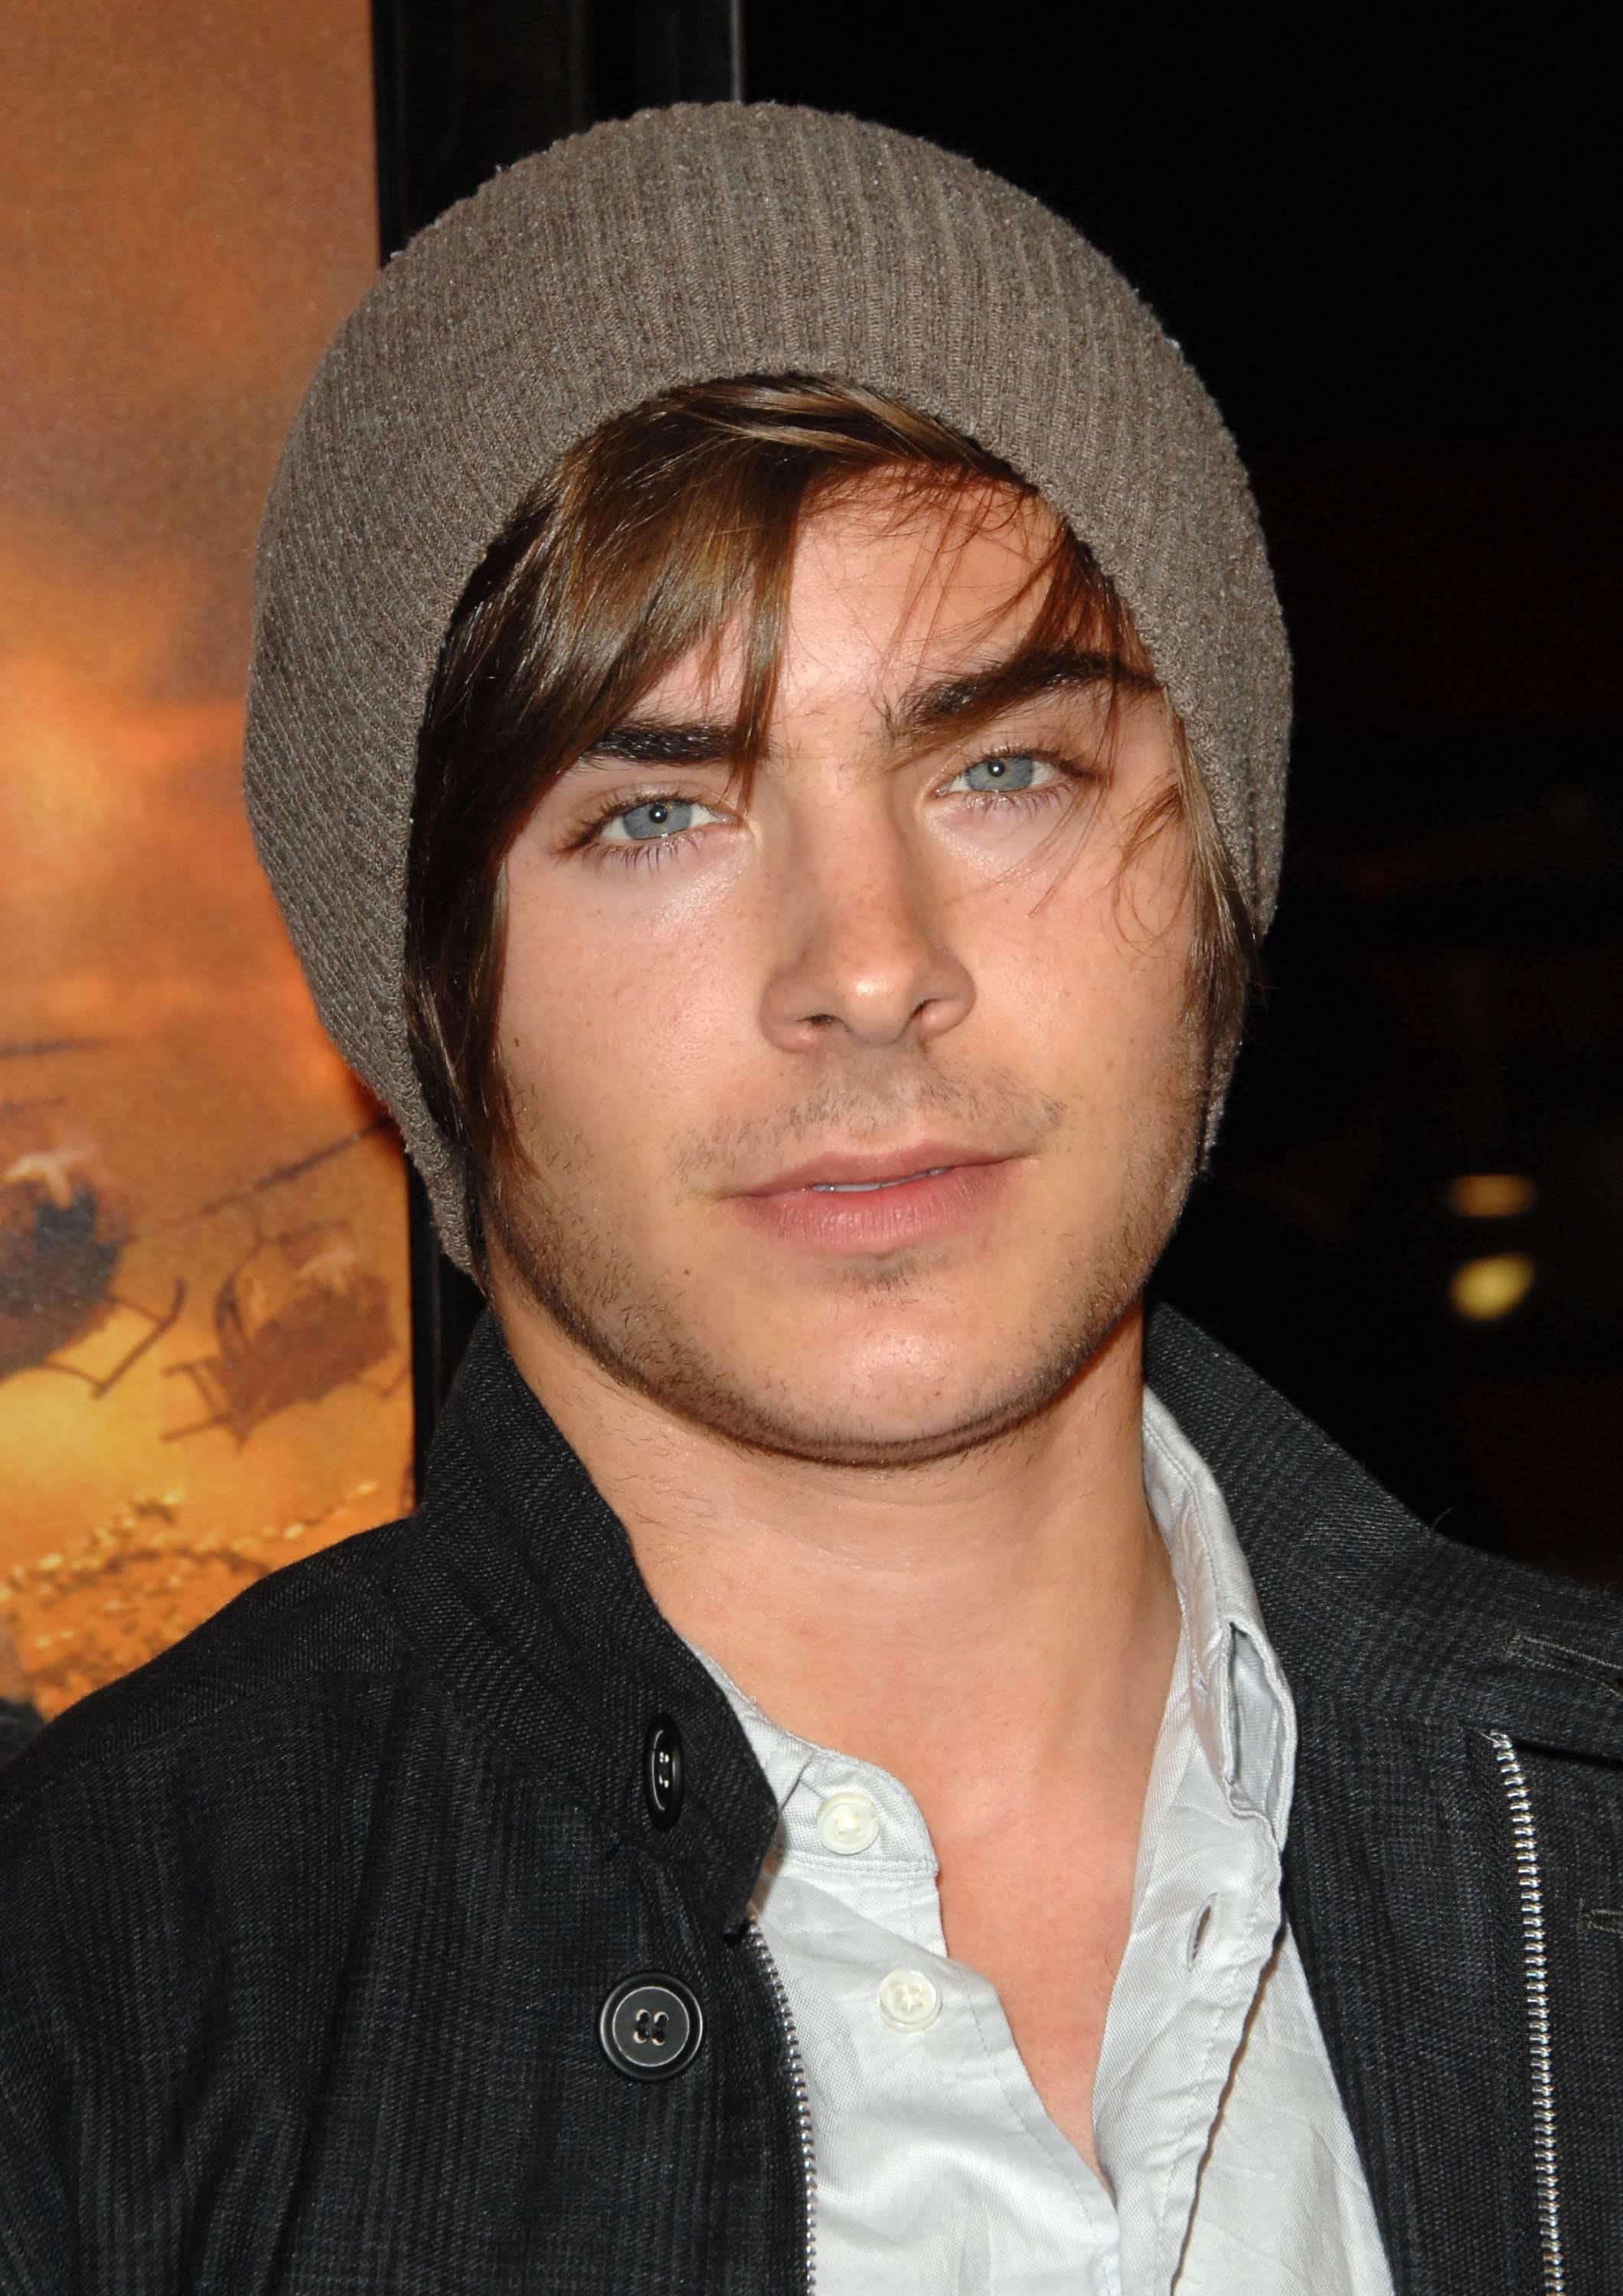 Zac Efron with a stylish outfit and a beanie bonnet covering his side-swept hairstyle. The photo was taken on March 2, 2009 at the Grauman's Chinese Theatre in Los Angeles, California.